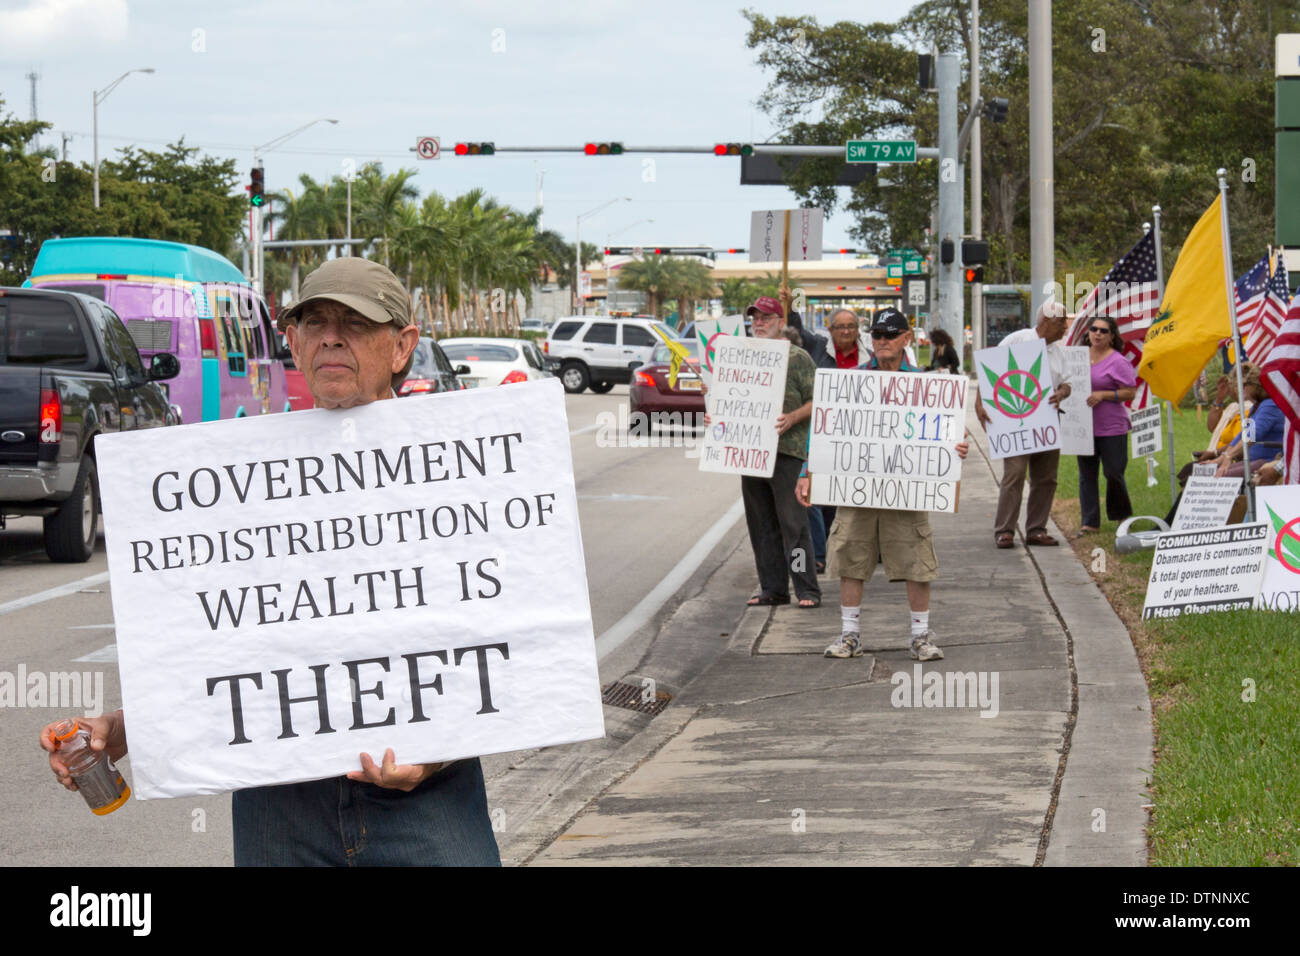 Miami, Florida - Cuban exiles, members of the Tea Party, rally on a variety of issues. Stock Photo